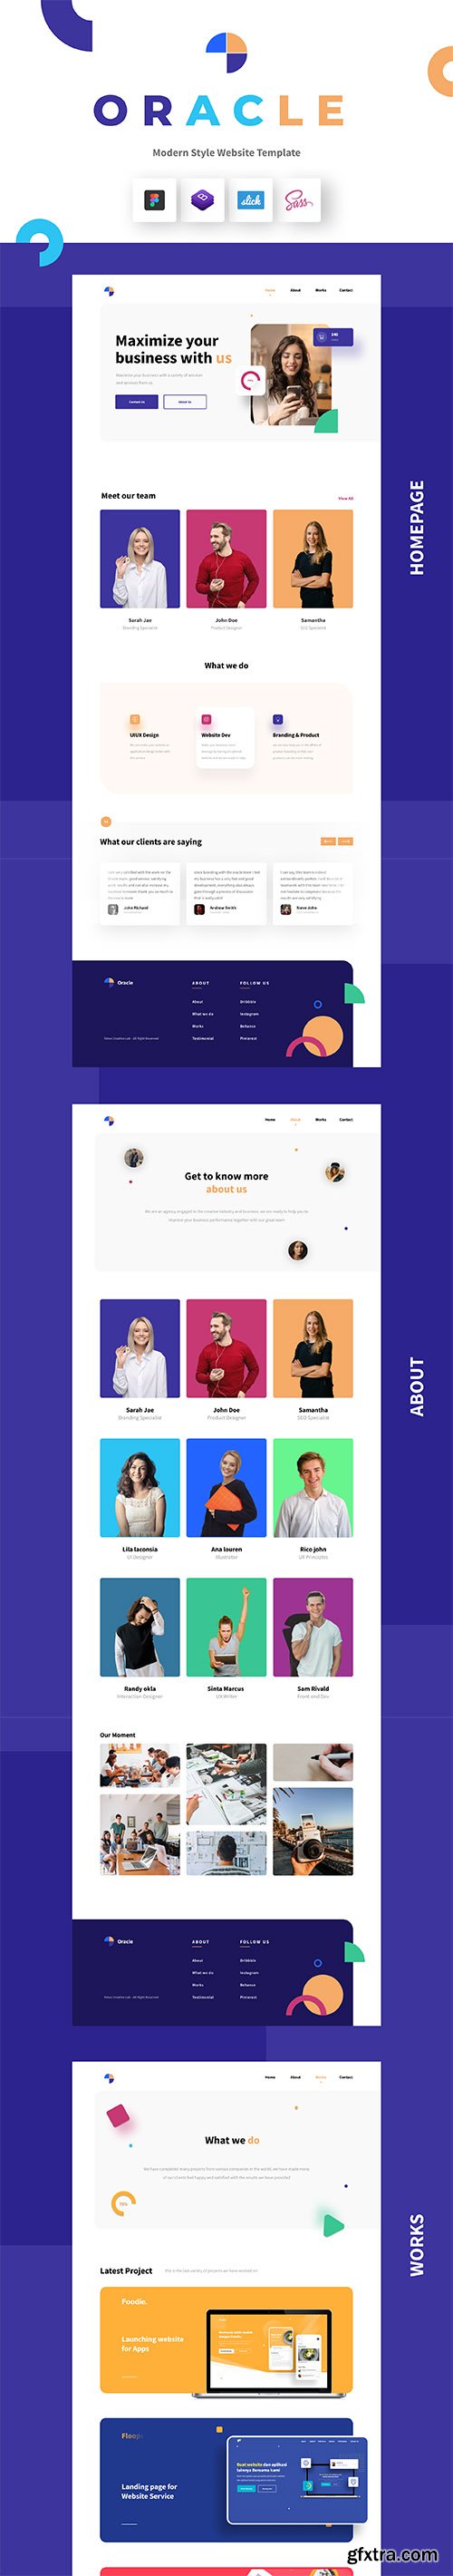 Oracle - Modern Style Website Template